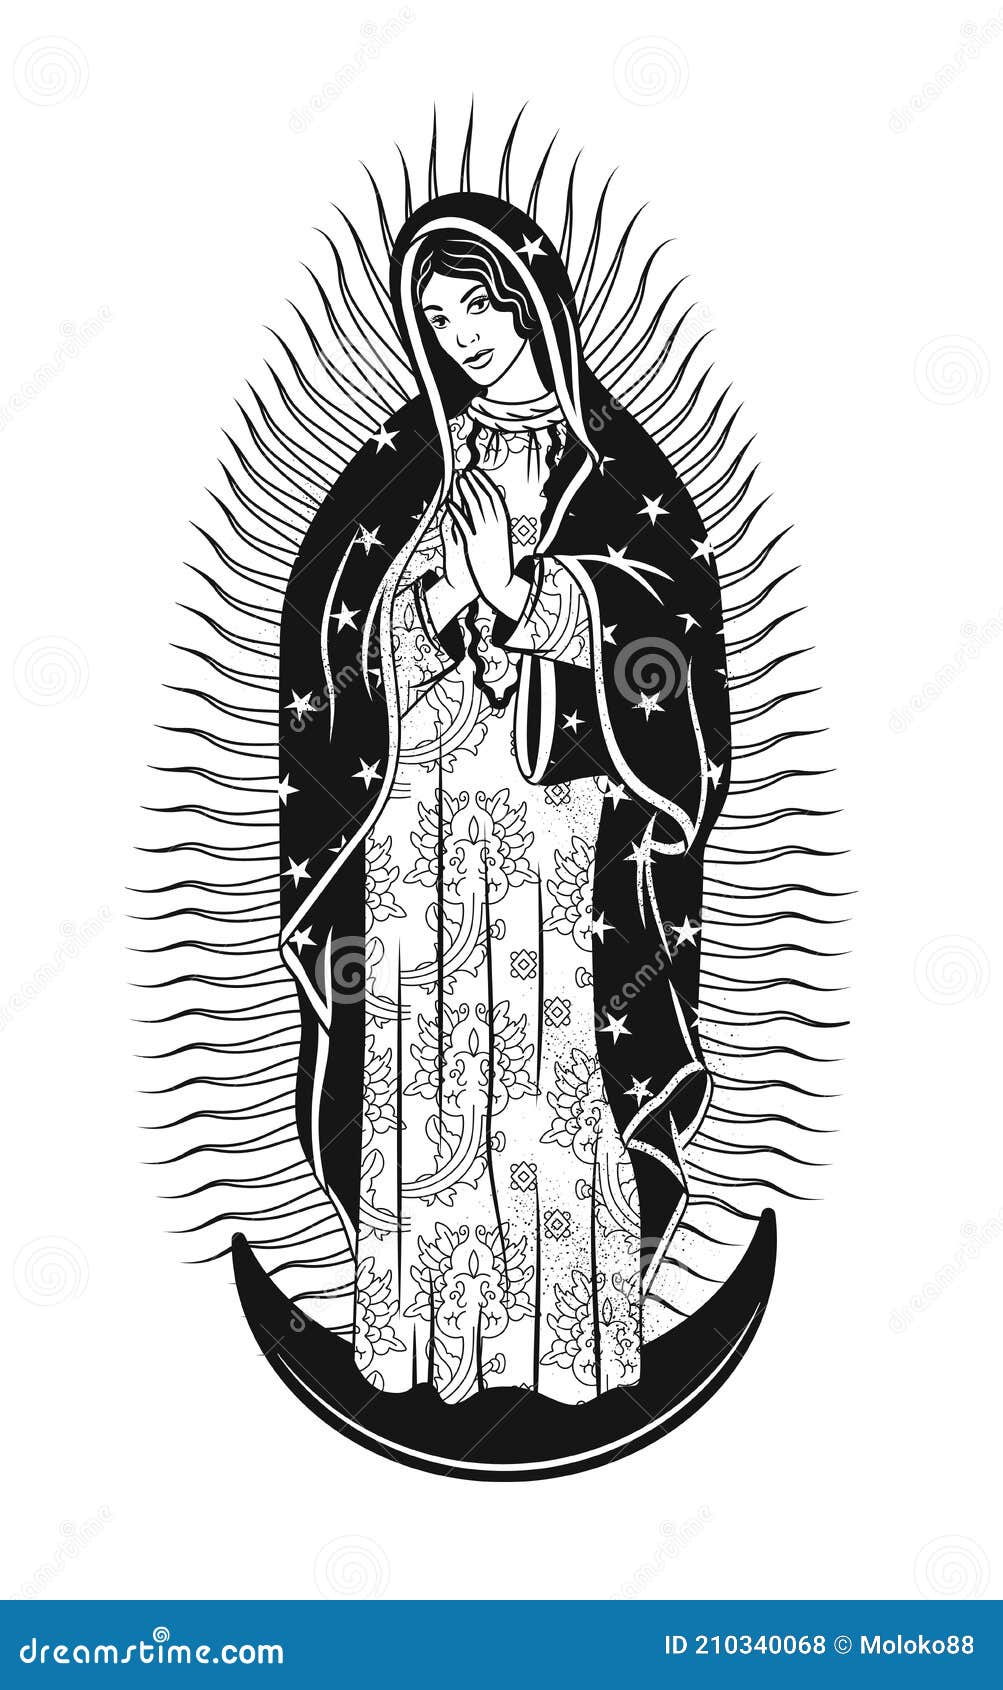 Micaela LewisTattoo  Micaela Lewis Our Lady of Guadalupe   Flickr